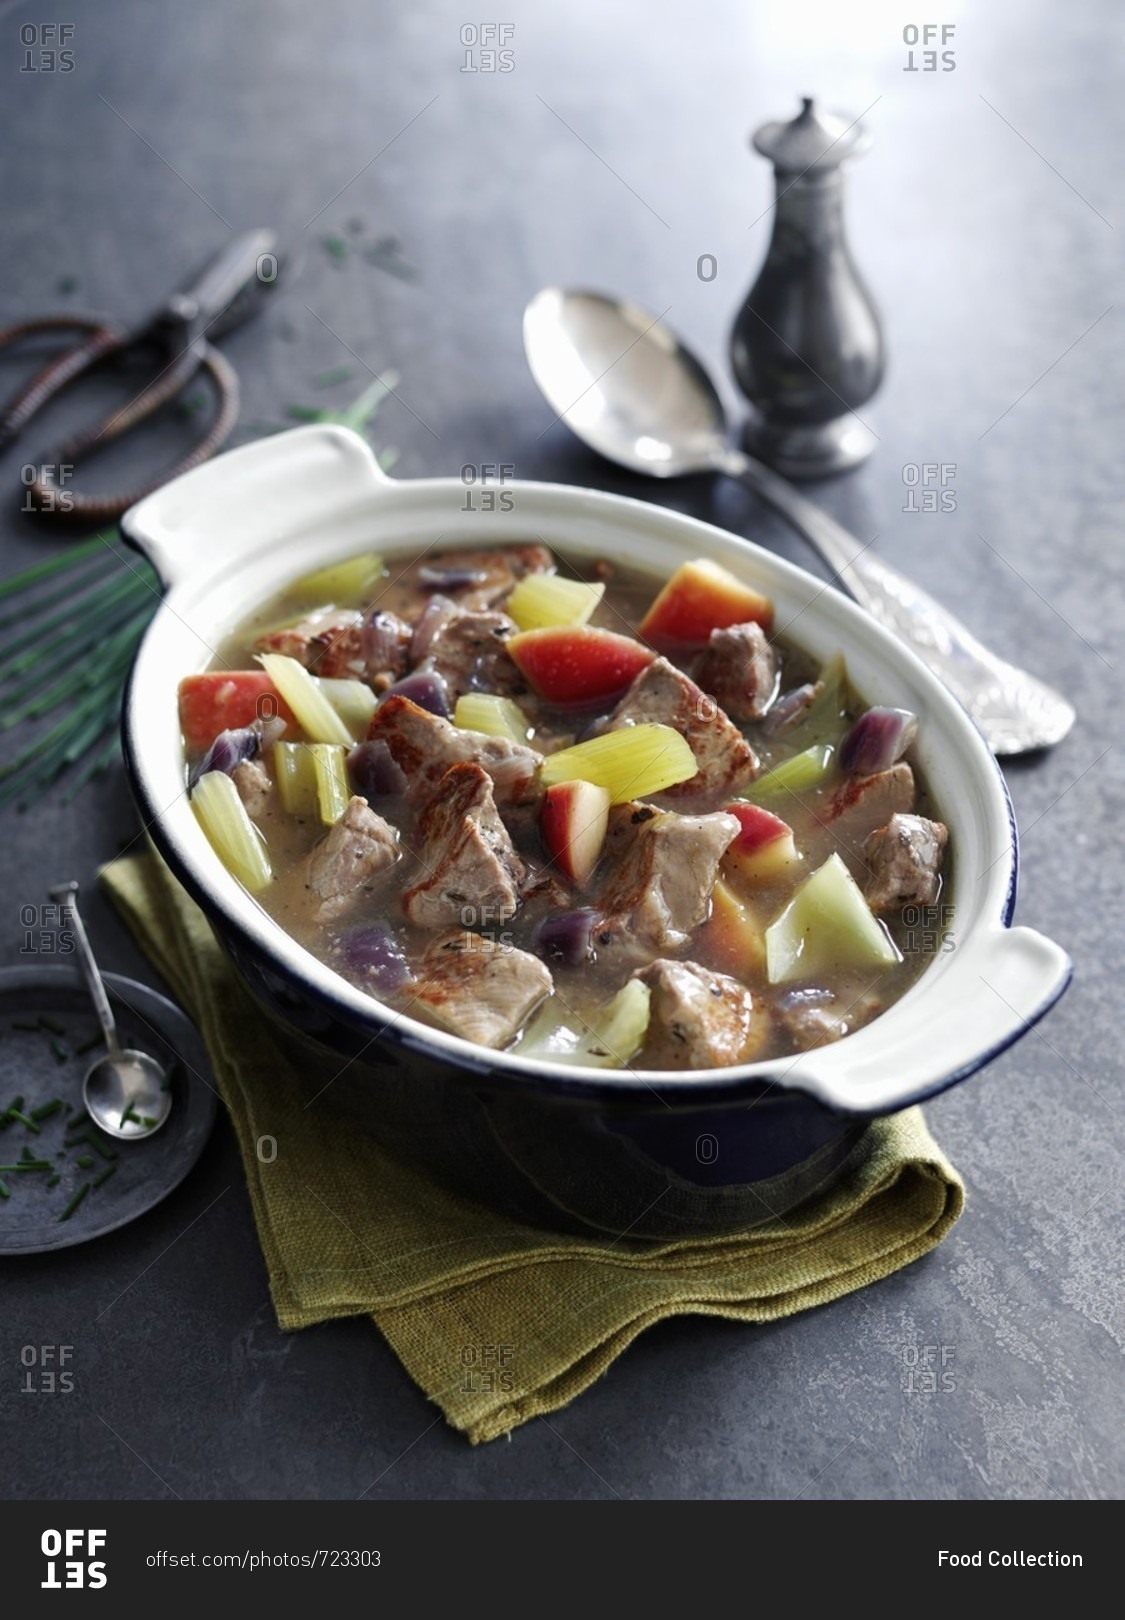 Braised pork with apples, celery, cider and mustard